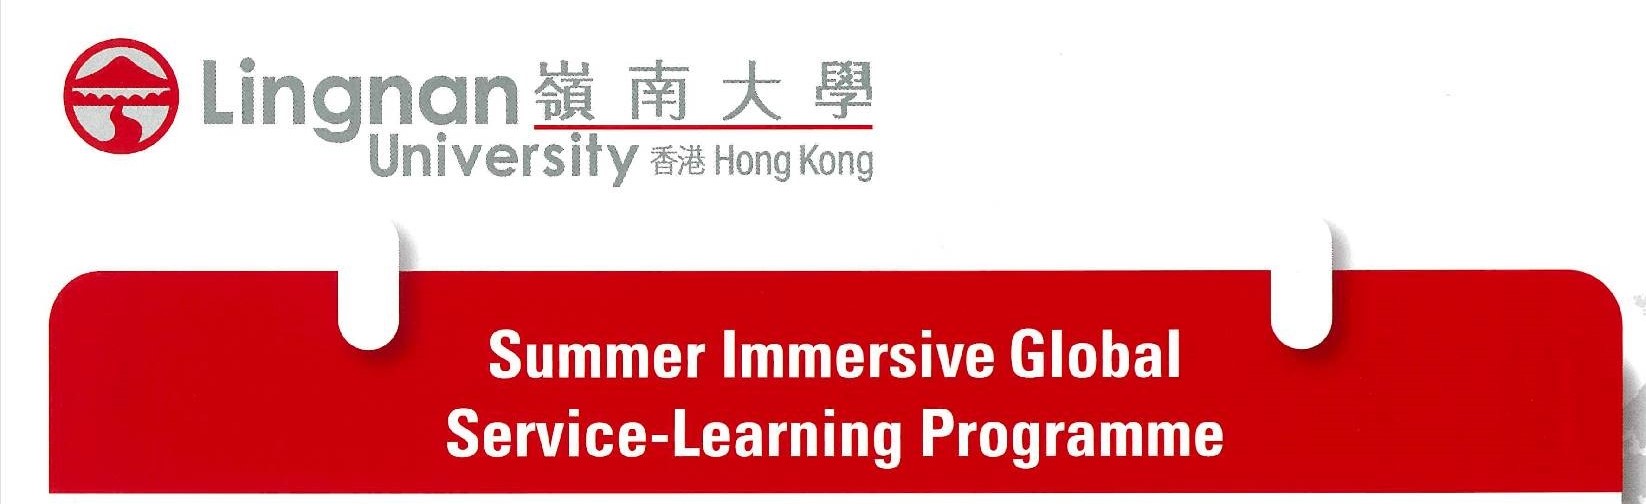 Summer Immersive Global Service-Learning Programme (by Lingnan University)